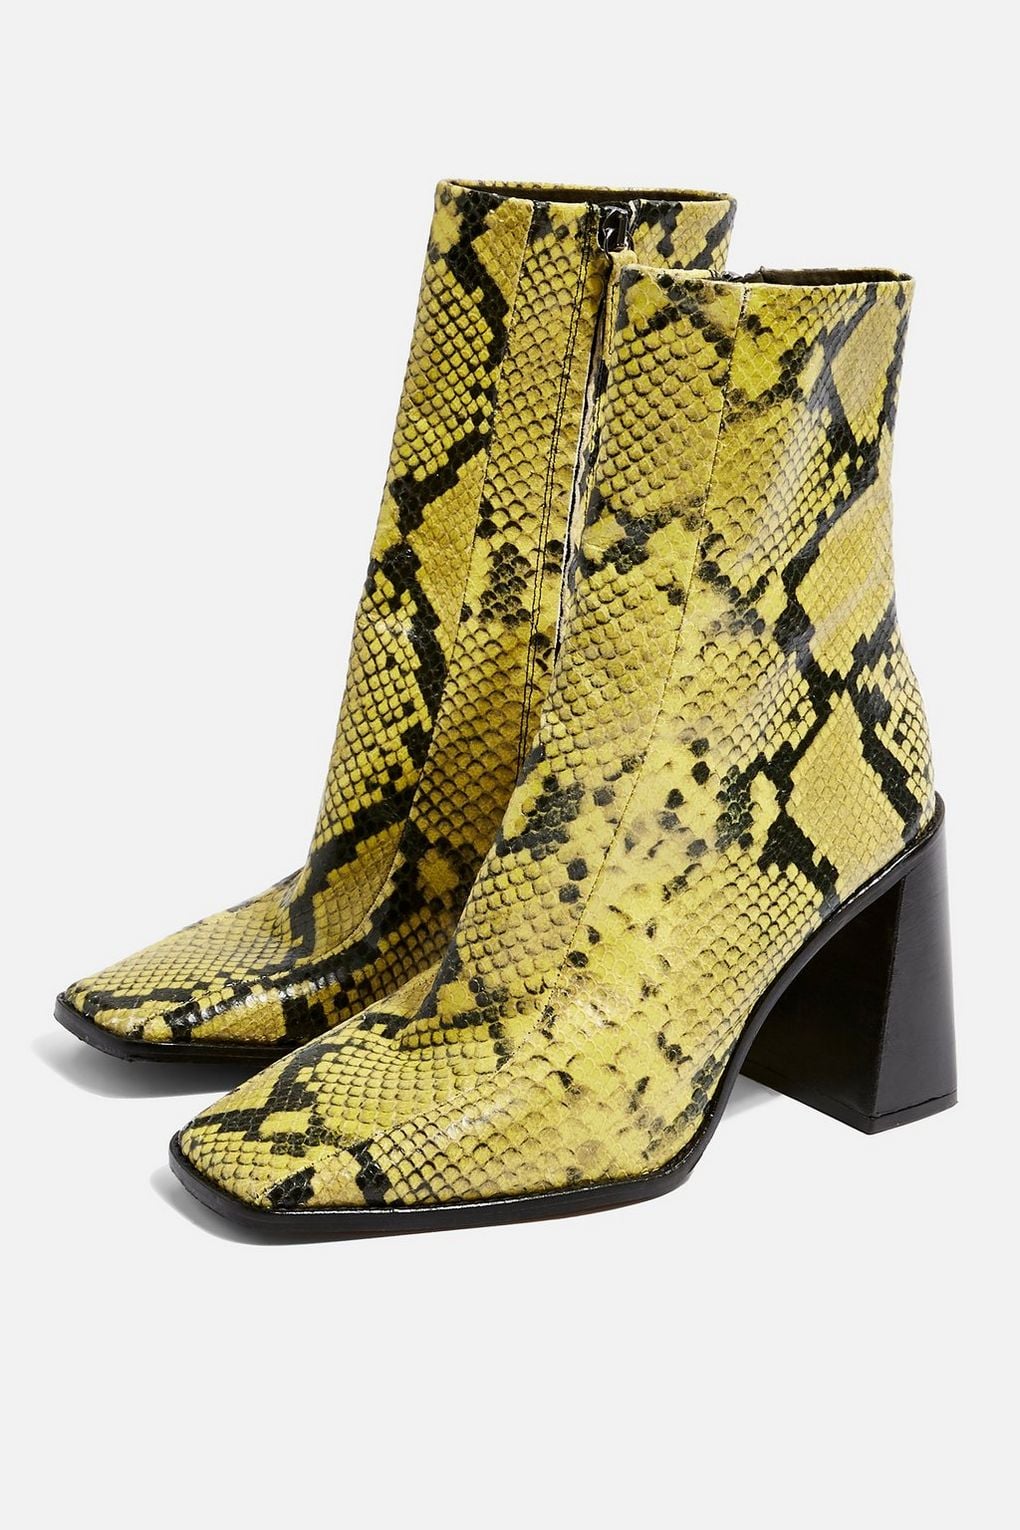 topshop snakeskin ankle boots